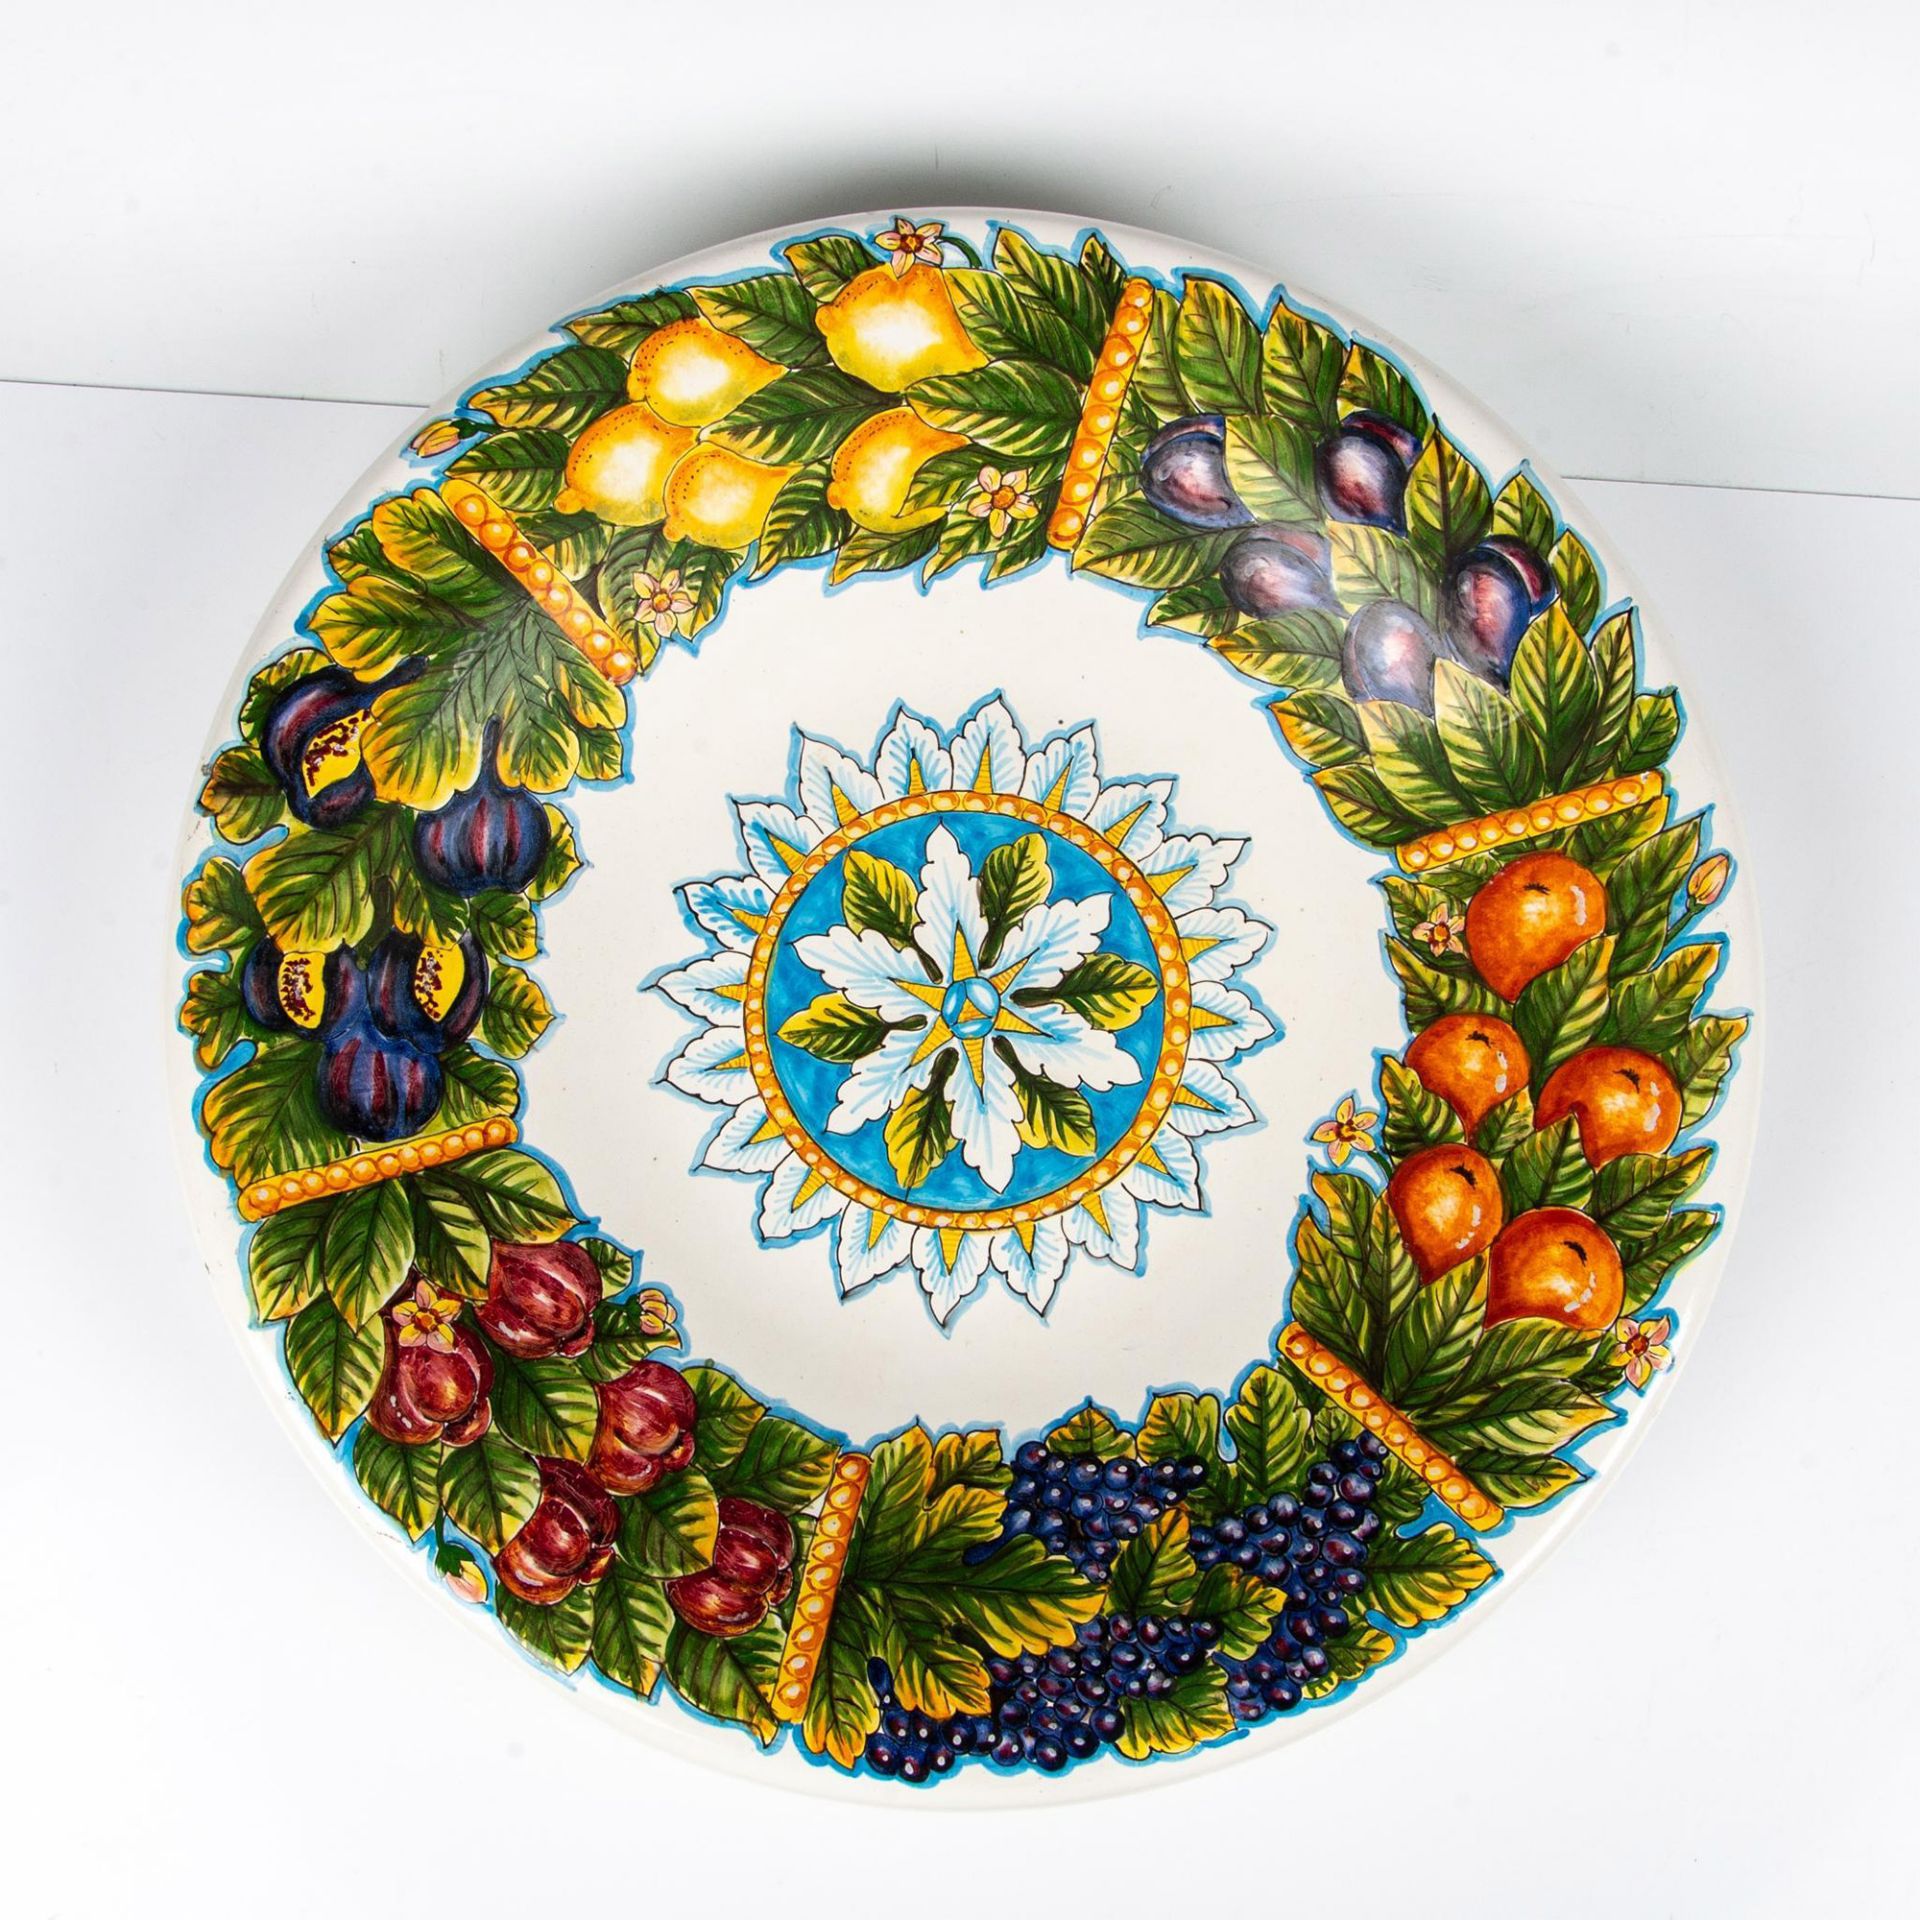 Vietri Italy Ceramic Charger with Fruit - Image 2 of 4